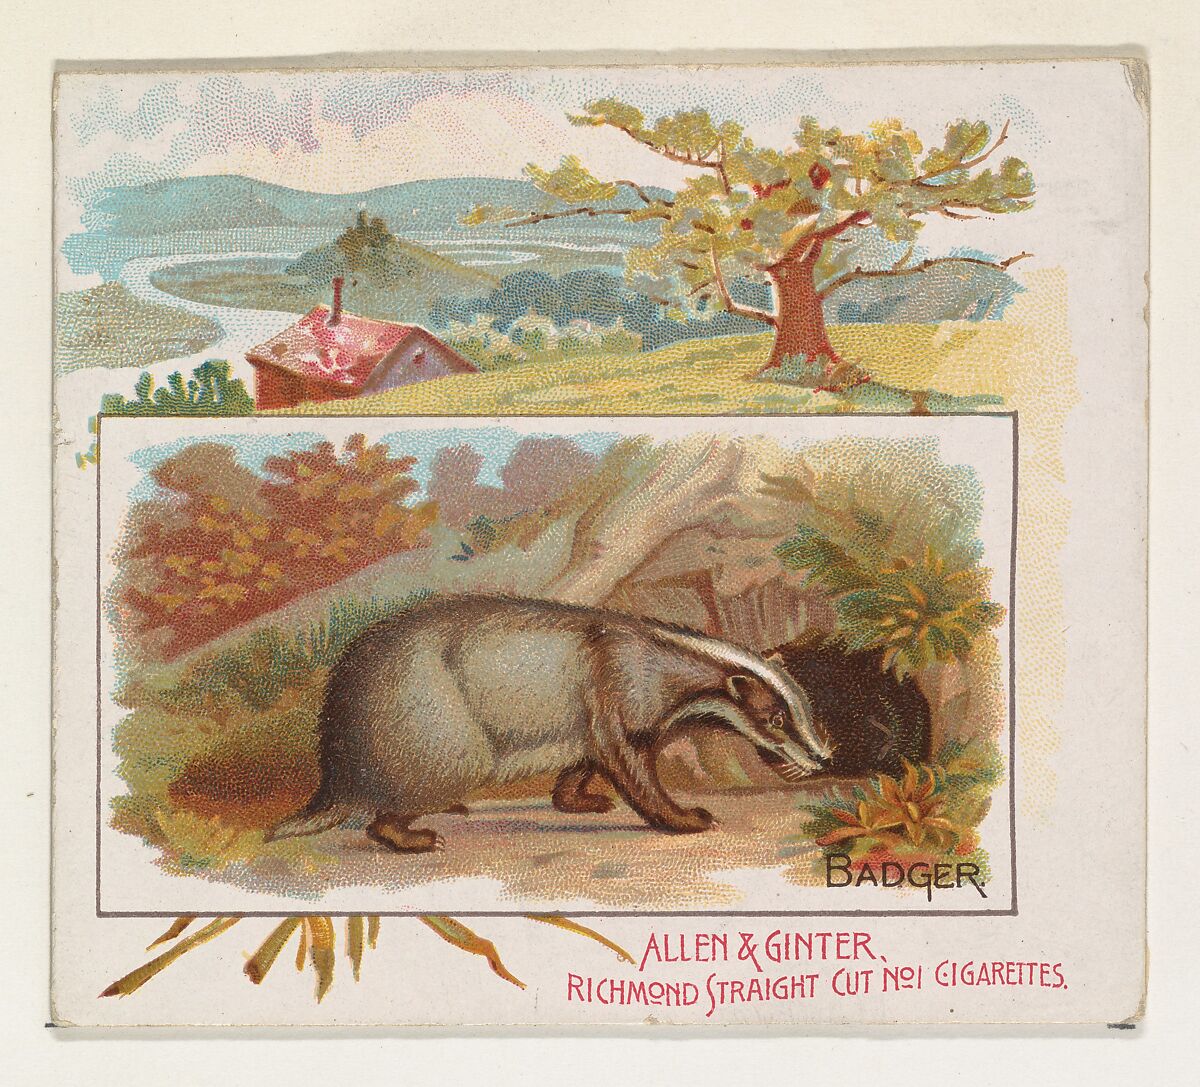 Badger, from Quadrupeds series (N41) for Allen & Ginter Cigarettes, Issued by Allen &amp; Ginter (American, Richmond, Virginia), Commercial color lithograph 